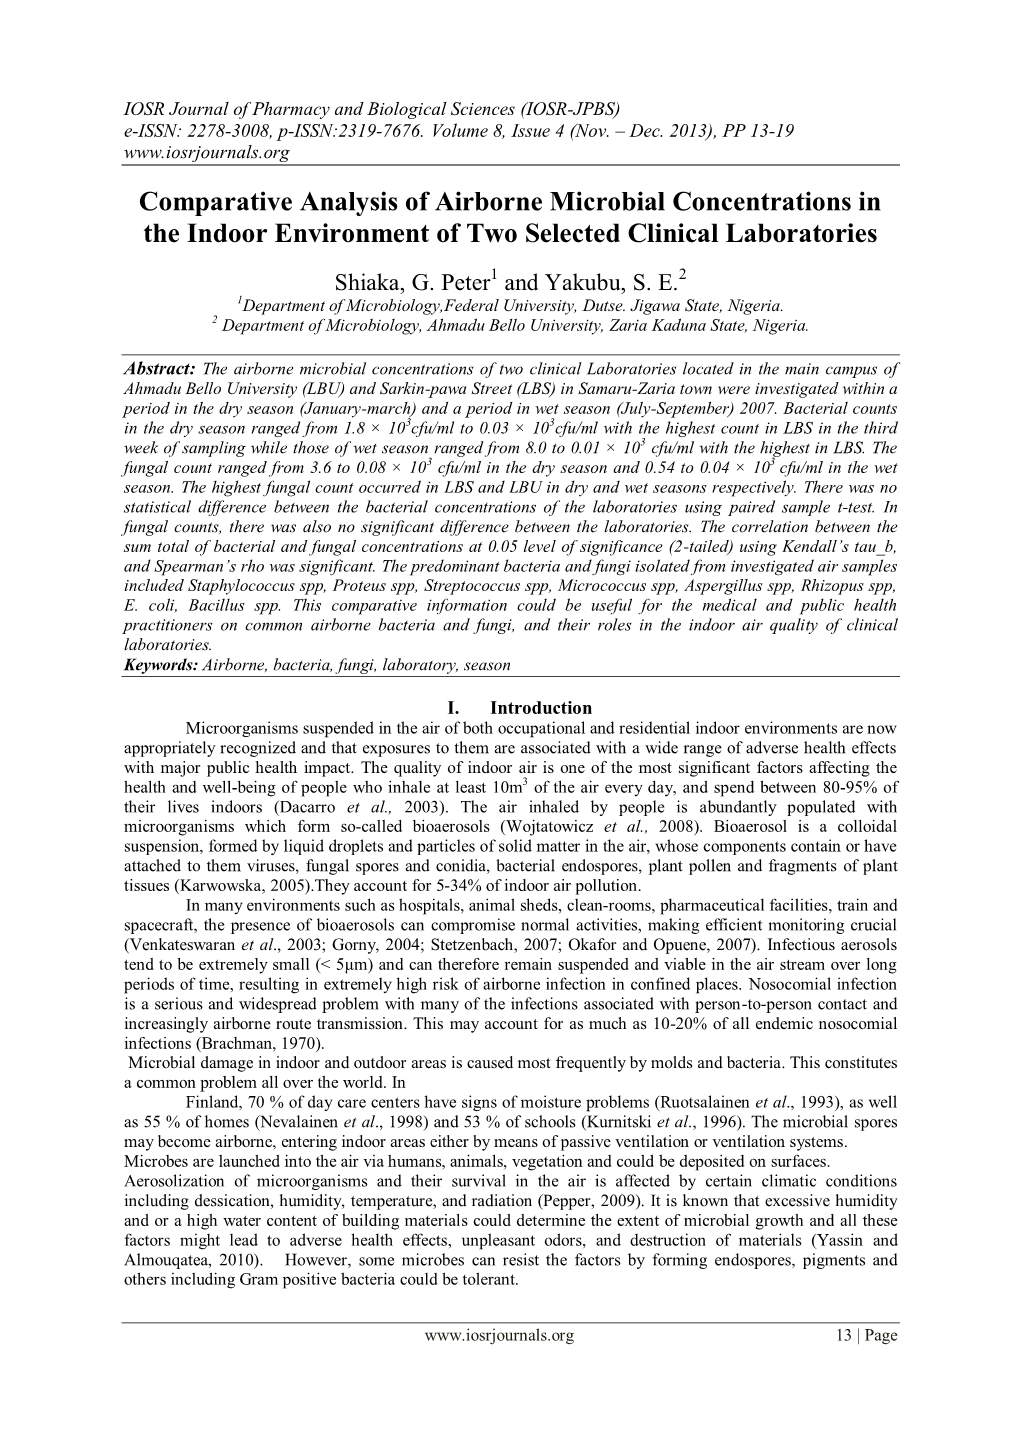 Comparative Analysis of Airborne Microbial Concentrations in the Indoor Environment of Two Selected Clinical Laboratories